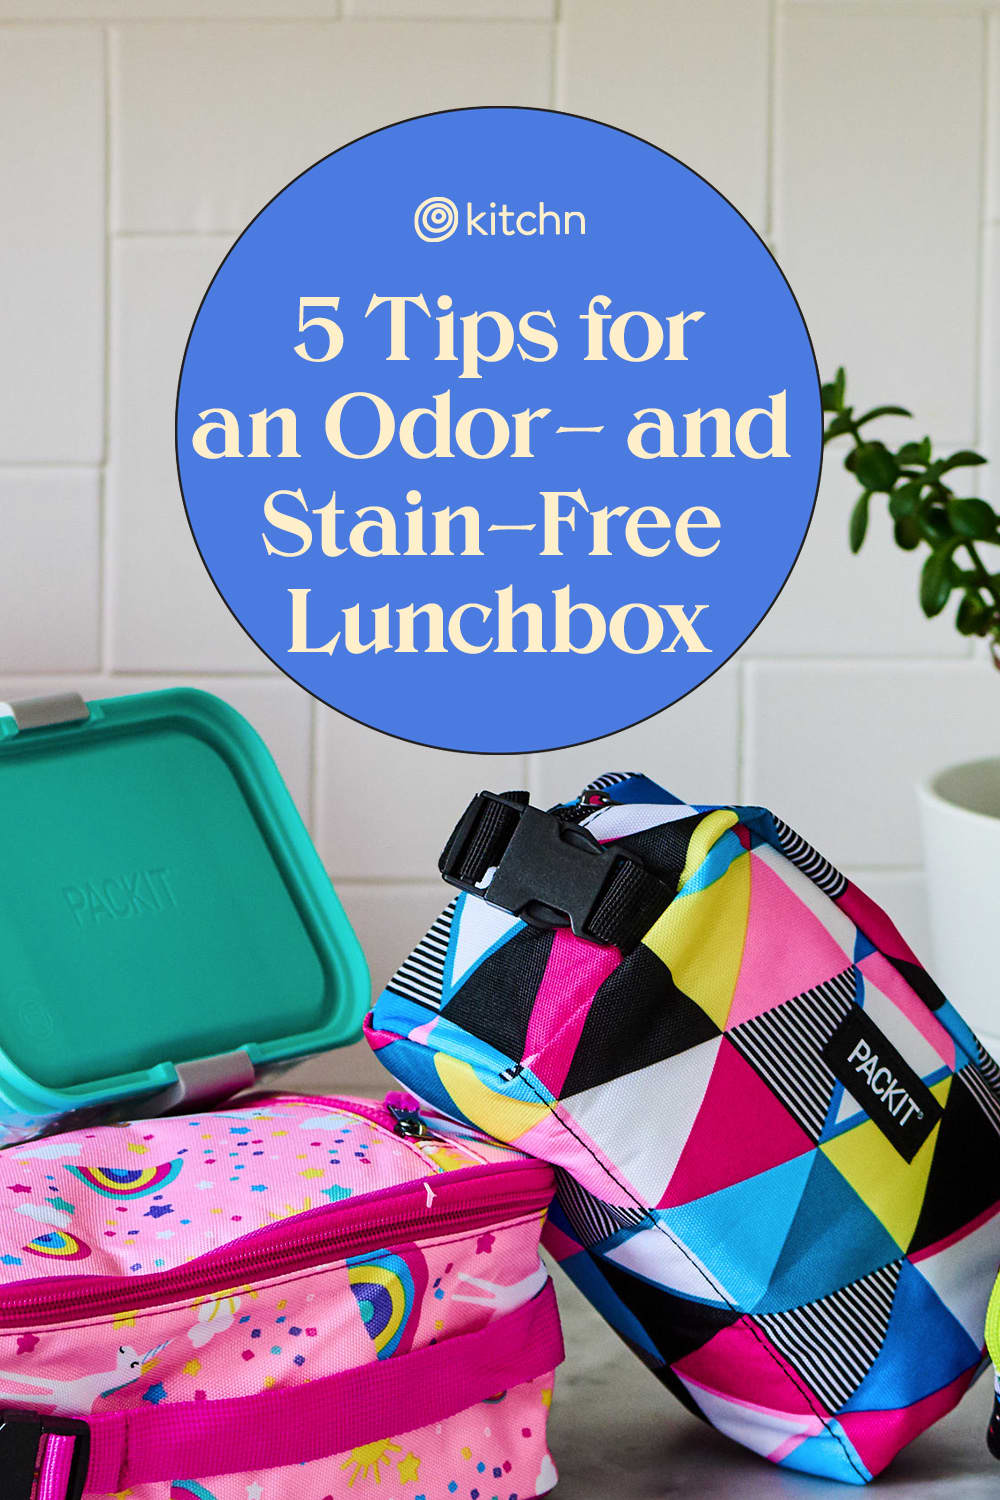 5 Proven Tips to Get Your Child's Lunch Box Odor- and Stain-Free